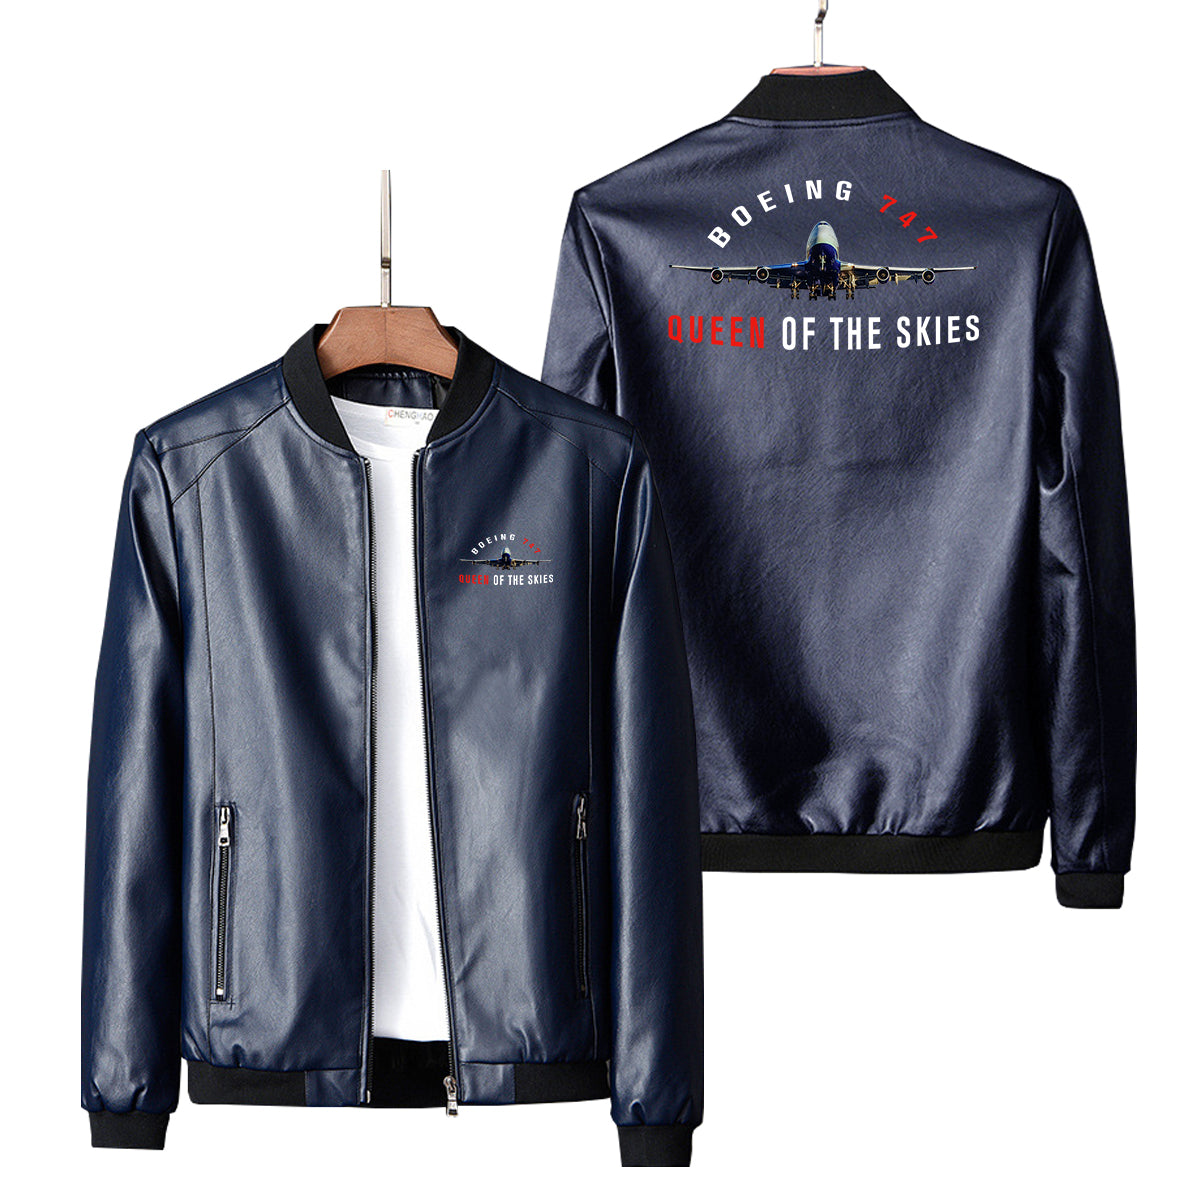 Boeing 747 Queen of the Skies Designed PU Leather Jackets